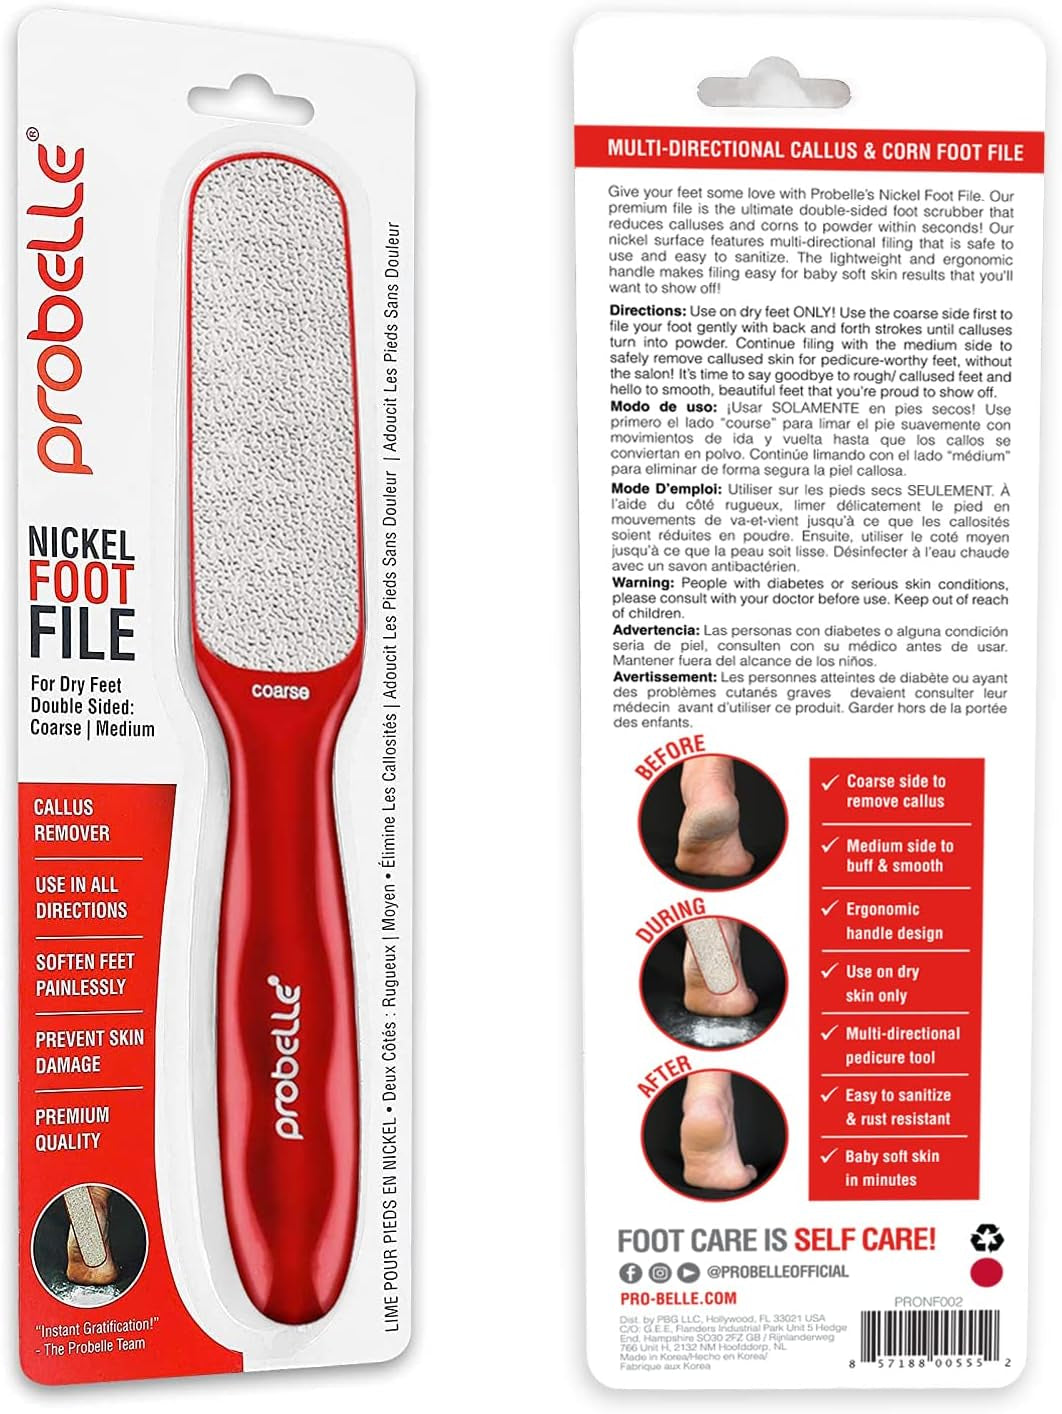 Double Sided Multidirectional Nickel Foot File Callus Remover - Immediately Reduces Calluses and Corns to Powder for Instant Results, Safe Tool (Red)